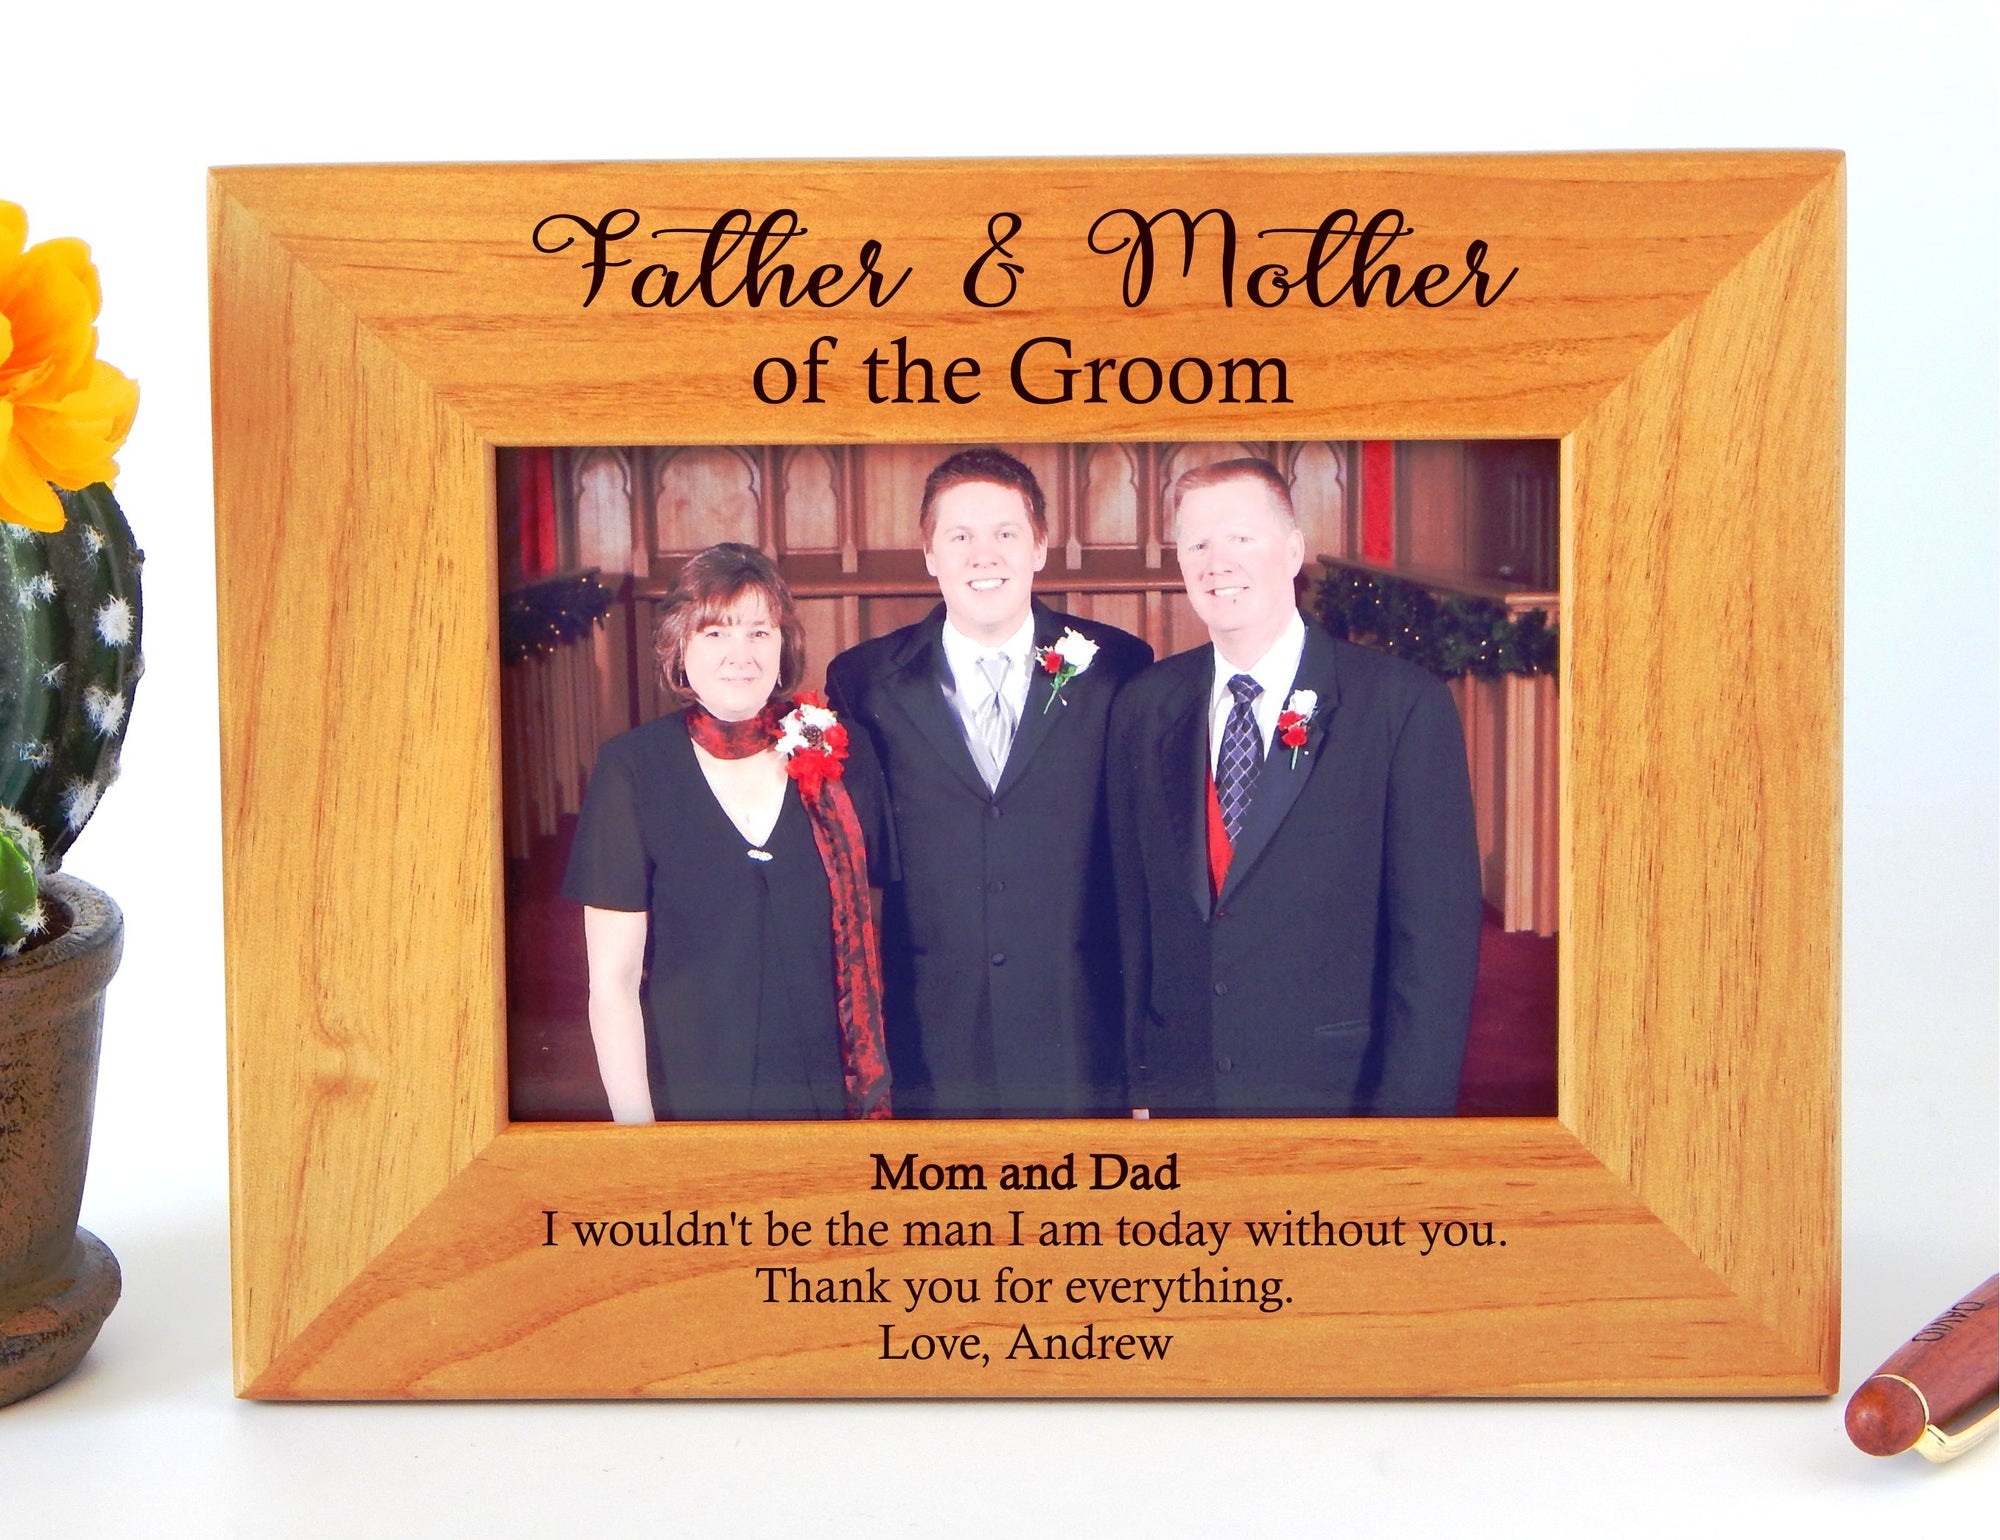 Personalized Picture Frame | Custom Engraved Wood Photo Frame for Wedding